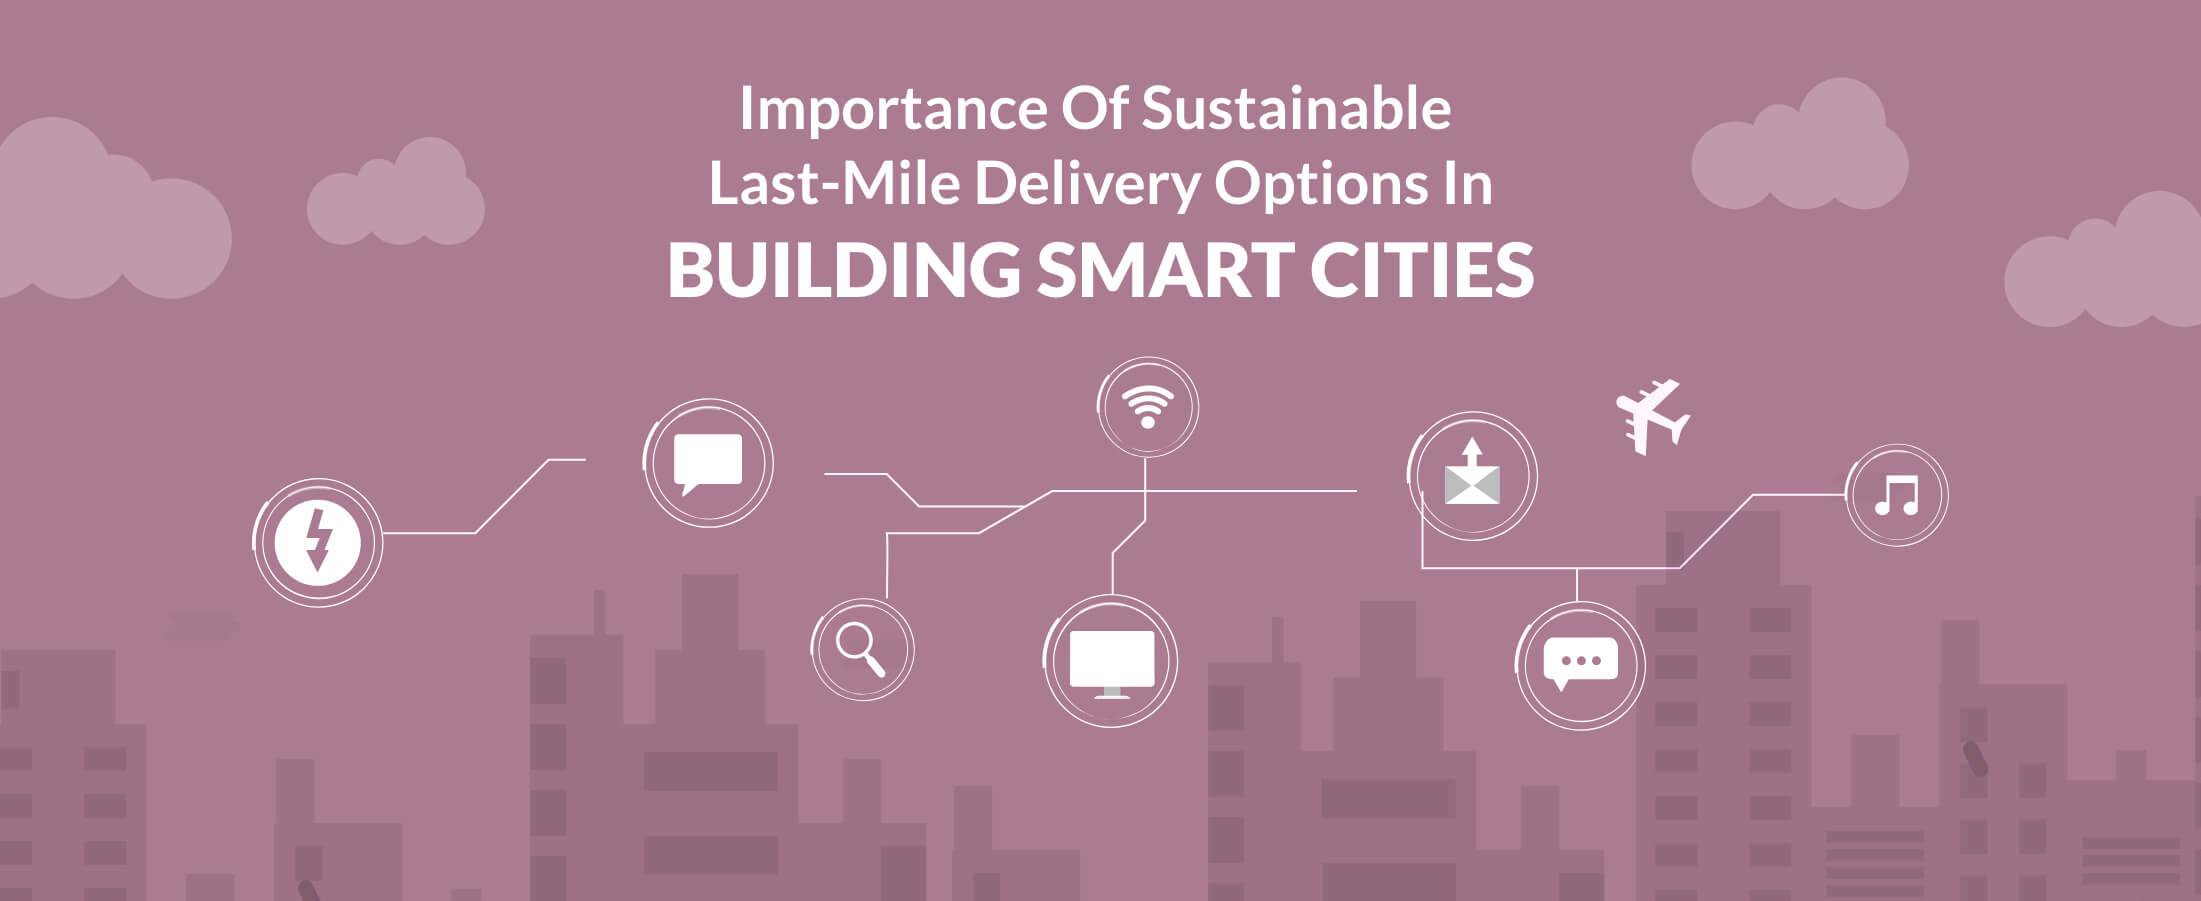 Importance of Sustainable Last-Mile Delivery Options in Building Smart Cities